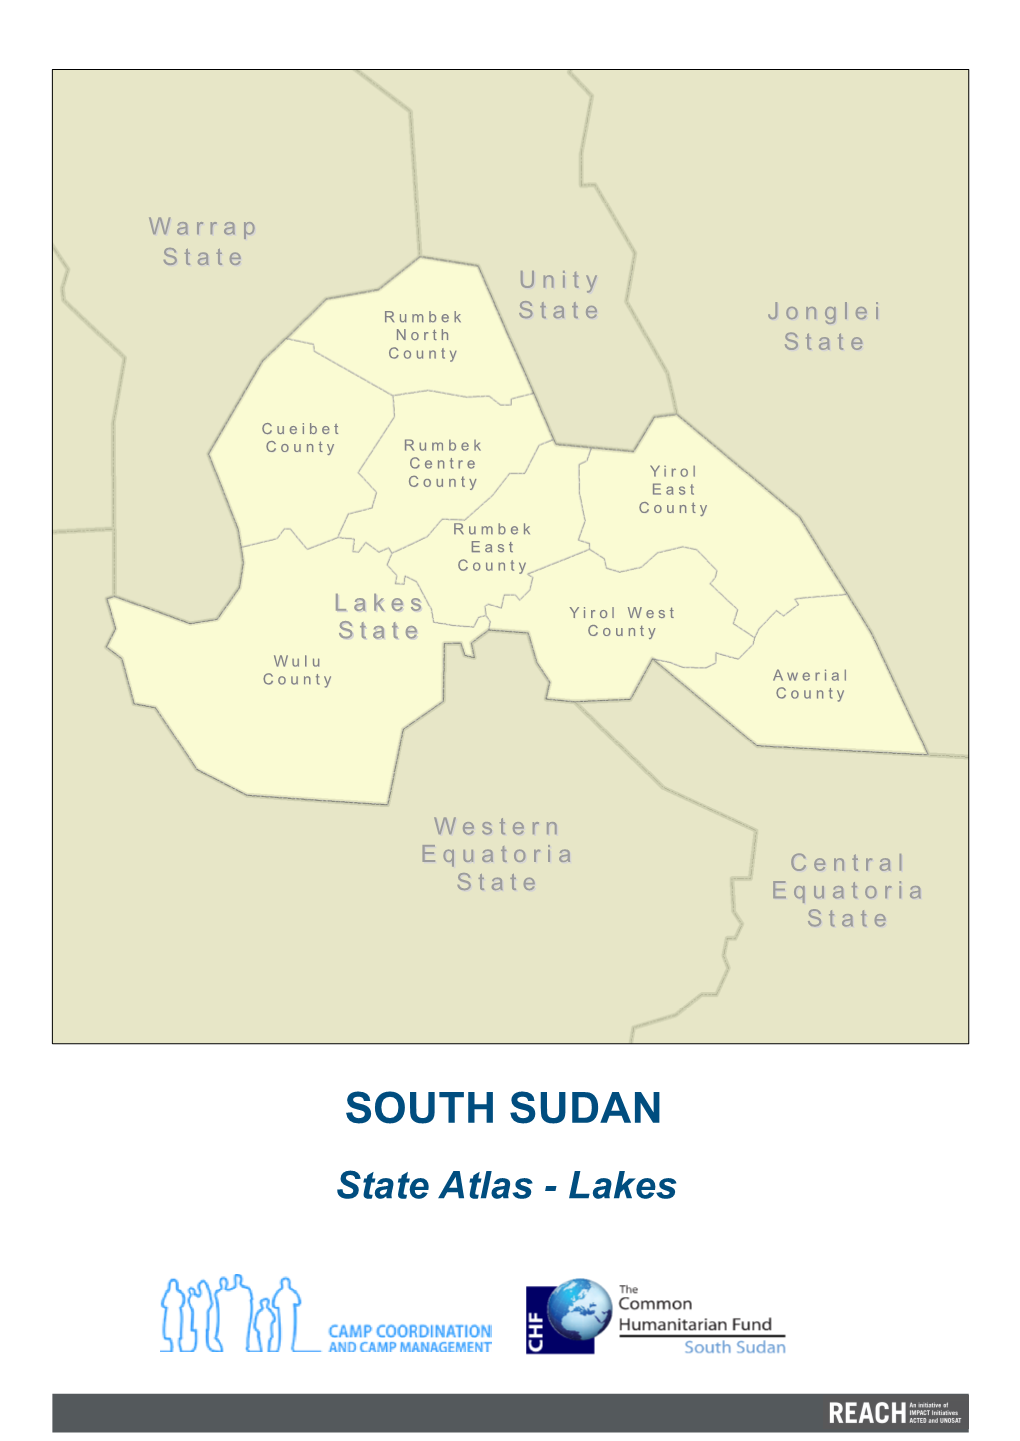 SOUTH SUDAN State Atlas - Lakes for Humanitarian Purposes Only SOUTH SUDAN Production Date: 30Th Sept 2015 Lakes State - Awerial County